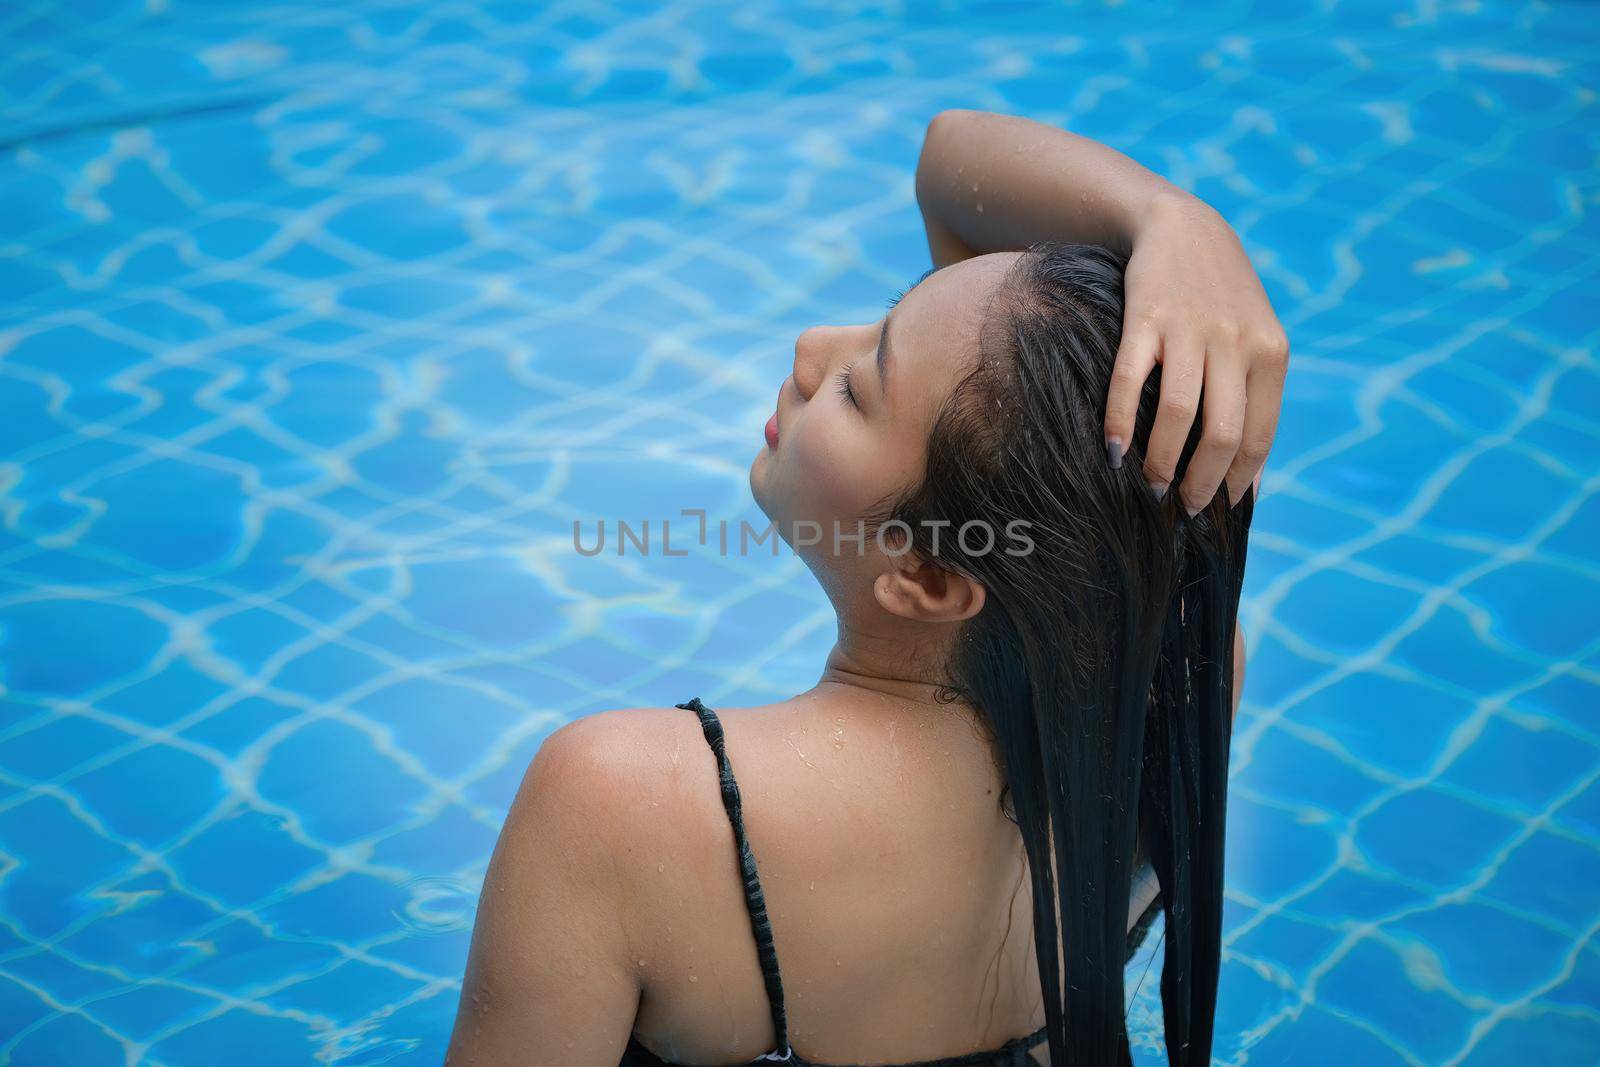 Beautiful southeast asia woman in pool relaxing. by Manastrong